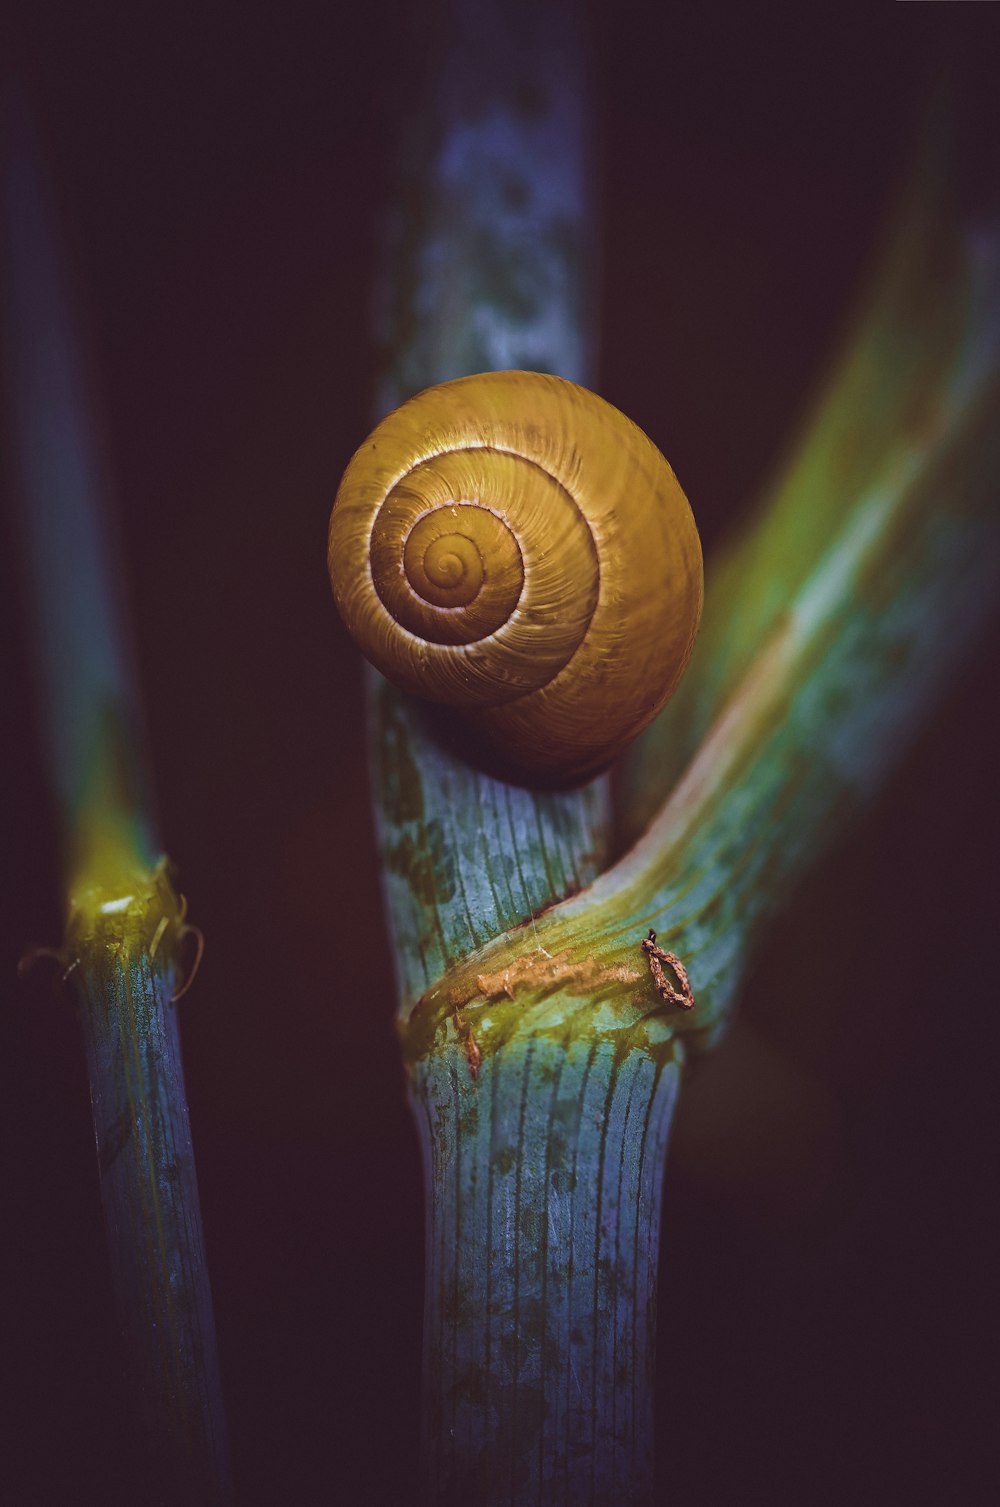 a close up of a snail on a plant